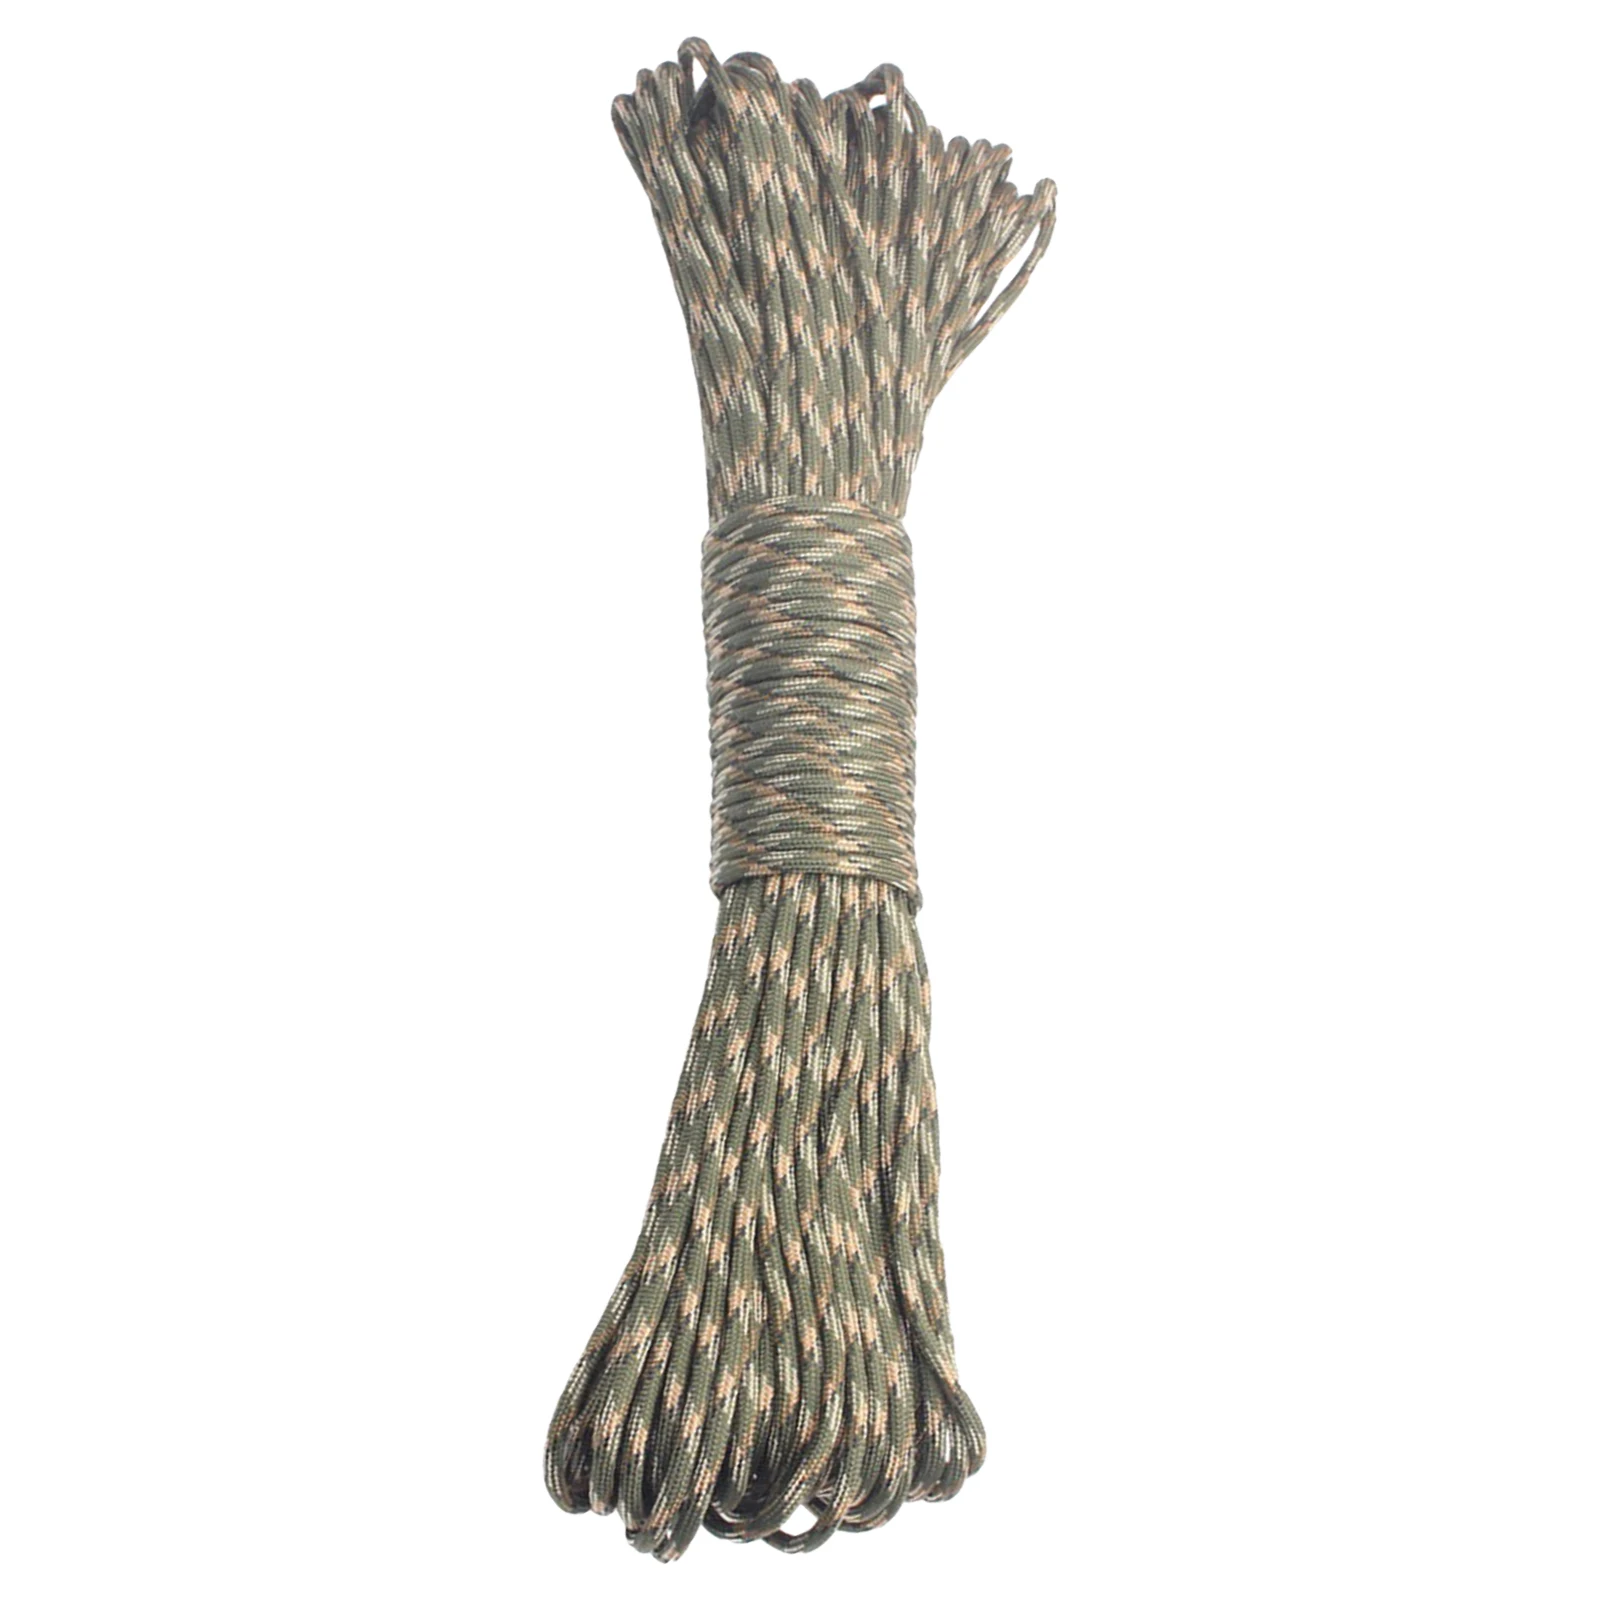 Paracord Ropes 4mm Diameter 7 Stand Paracord Ropes Durable Paracord 31m Camping Hiking Tent Rope Outdoor Travel Clothesline